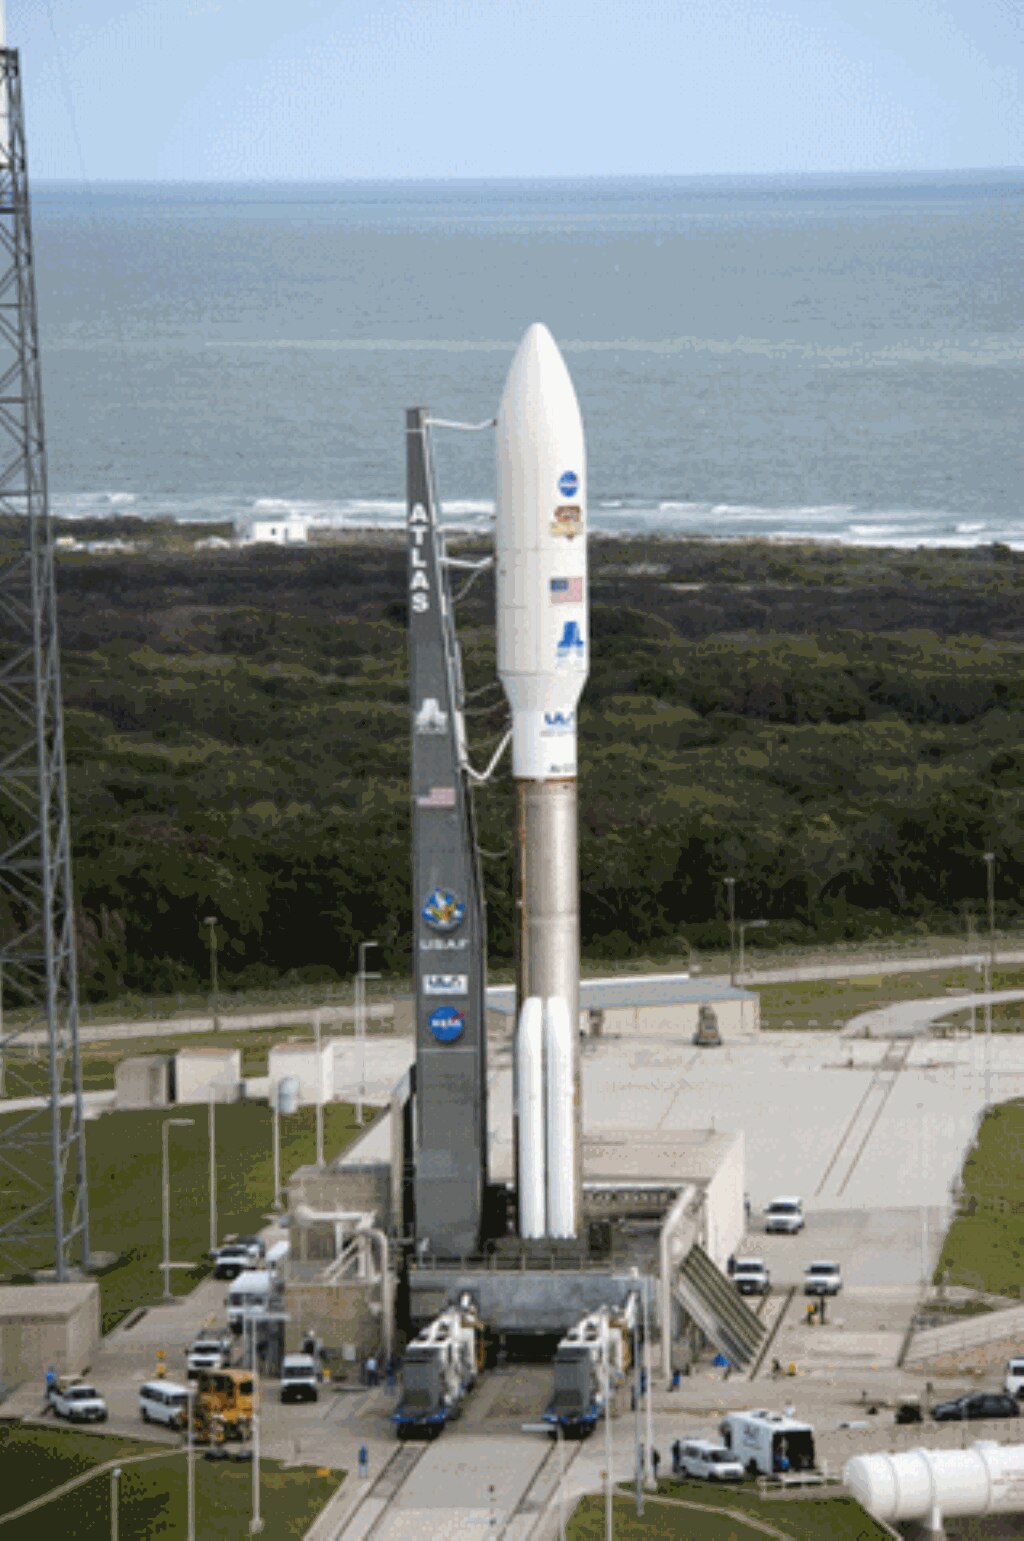 The 60-meter-tall Atlas V rocket arrives on the launch pad at Space Launch Complex-41 near the Atlantic Ocean. (NASA/Tony Gray)